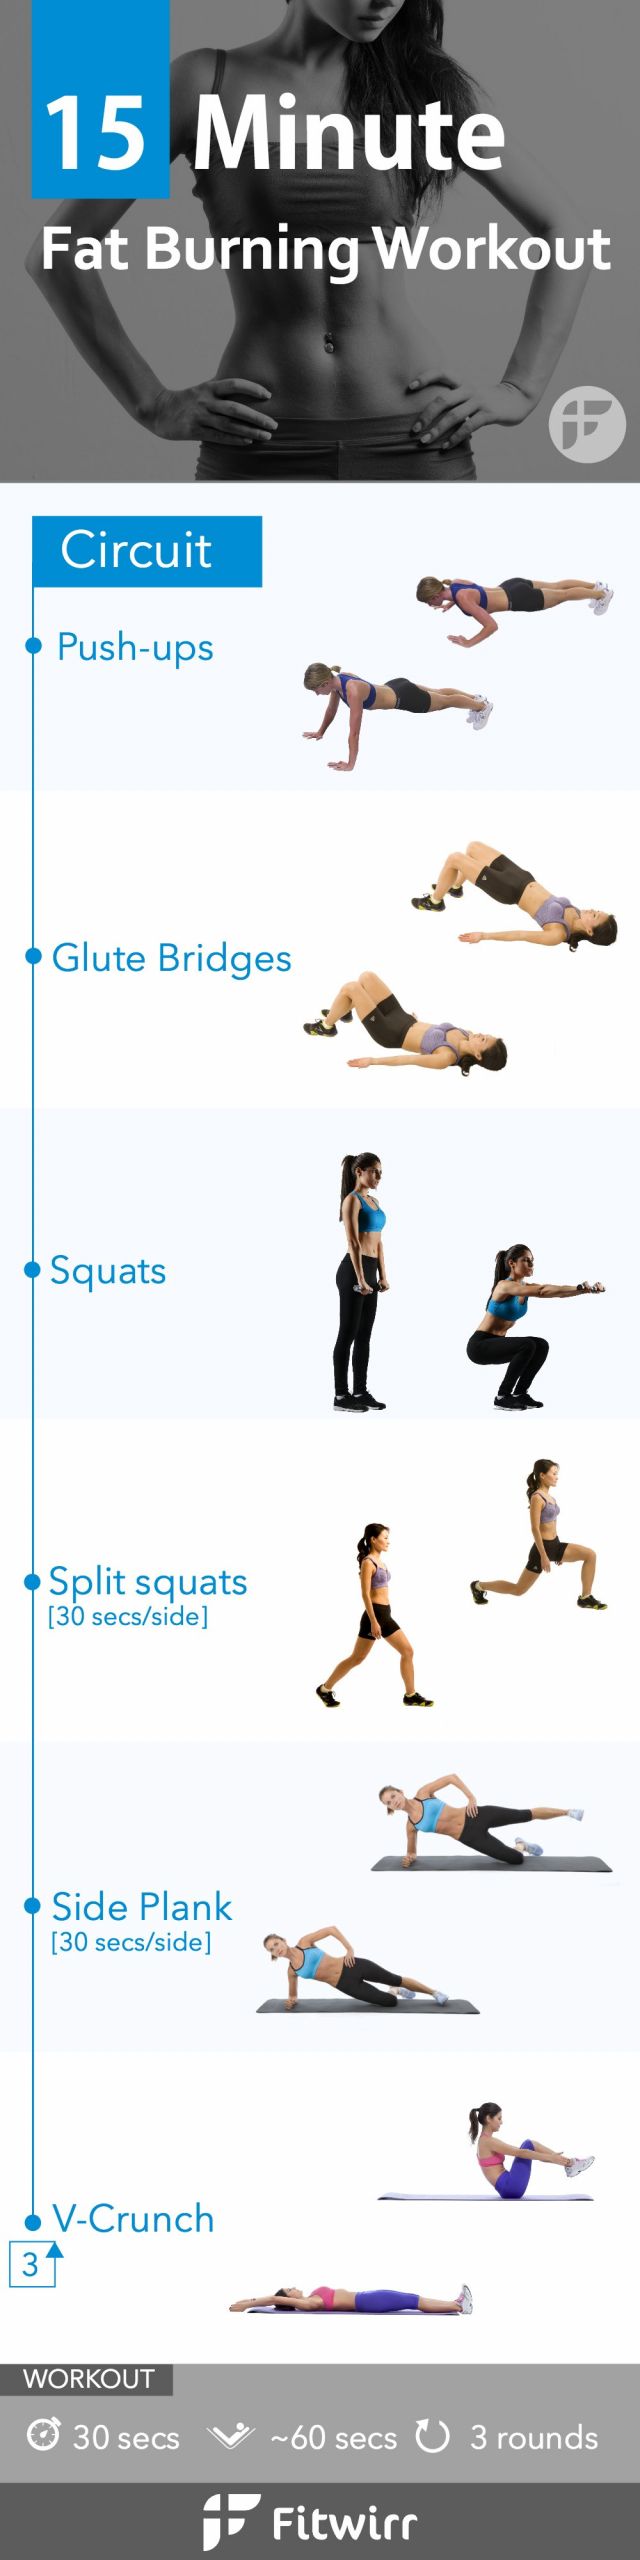 Fat Burning Workout With Weights
 15 Minute Bodyweight Fat Loss Workout for Women